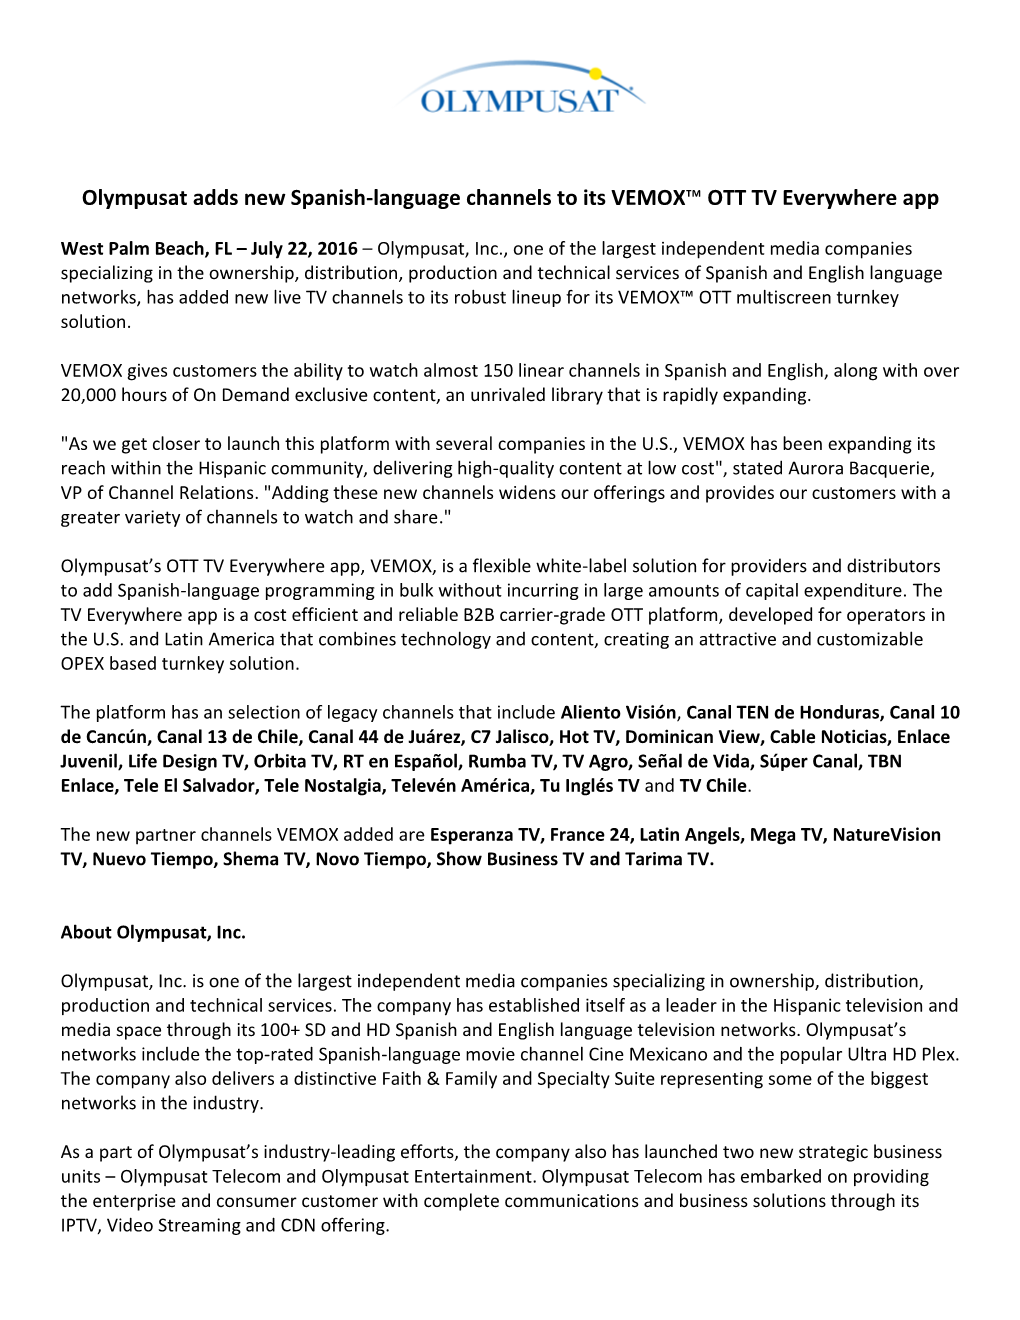 Olympusat Adds New Spanish-Language Channels to Its VEMOX™ OTT TV Everywhere App